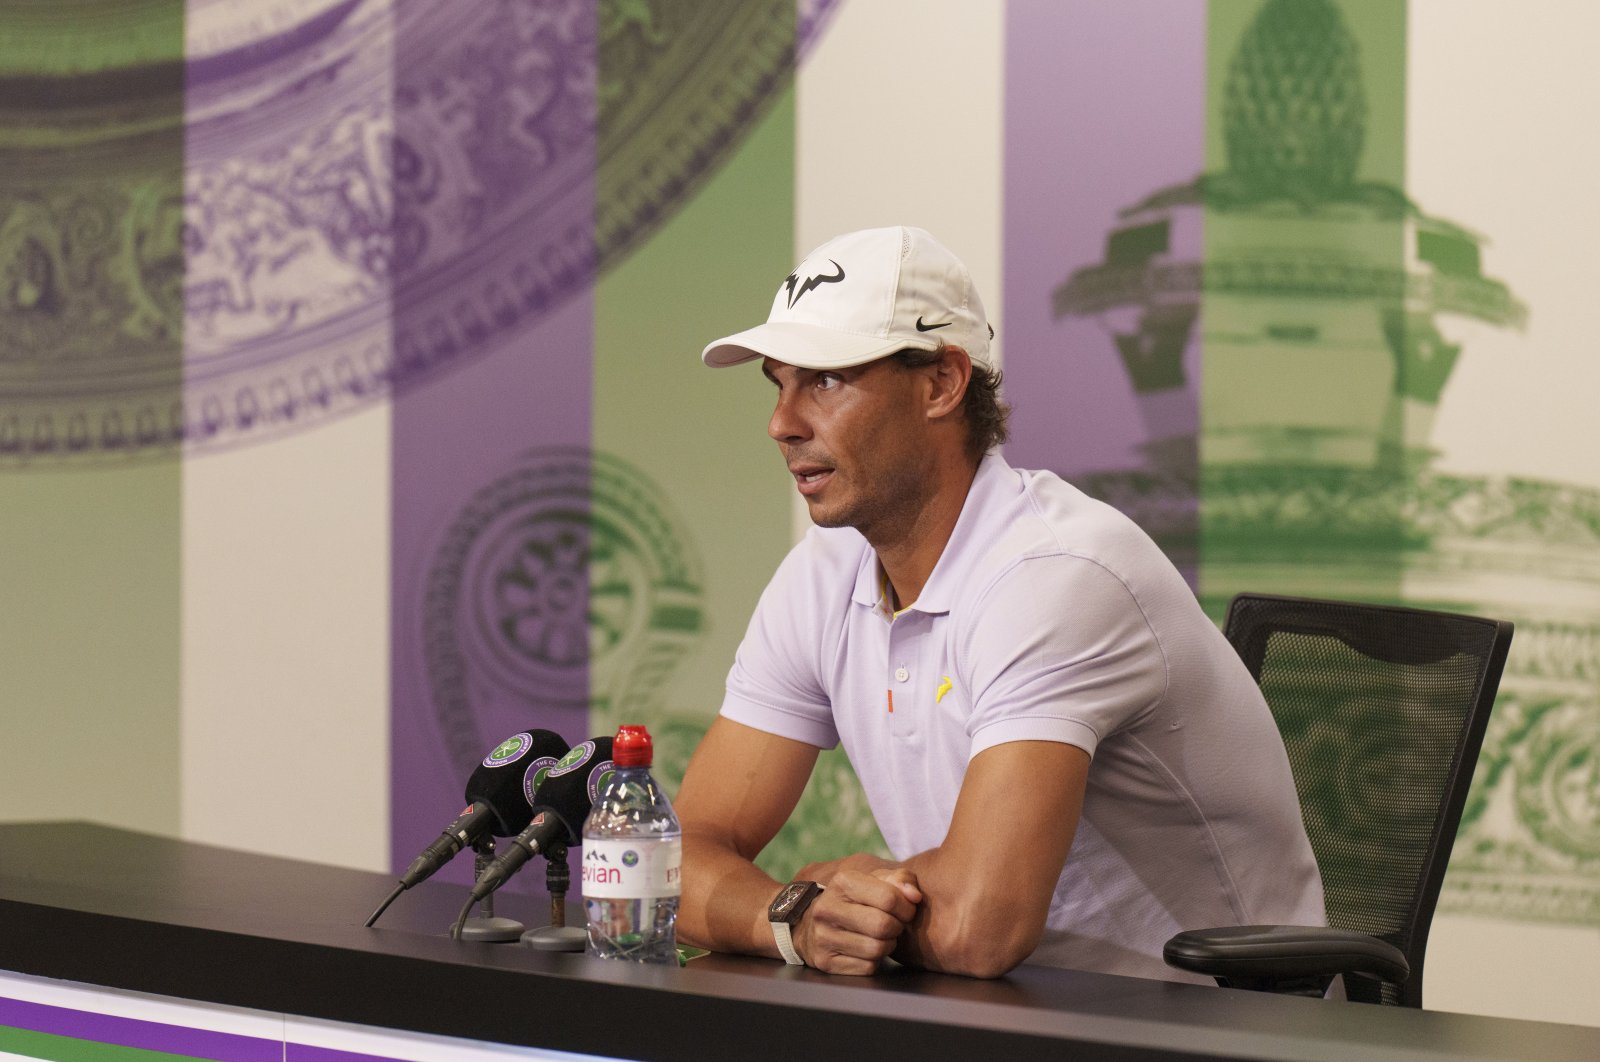 Spain’s Rafael Nadal announces that he is withdrawing from the men’s singles semifinal match at the Wimbledon tennis championships, in London, England, Thursday, July 7, 2022. (AP Photo)